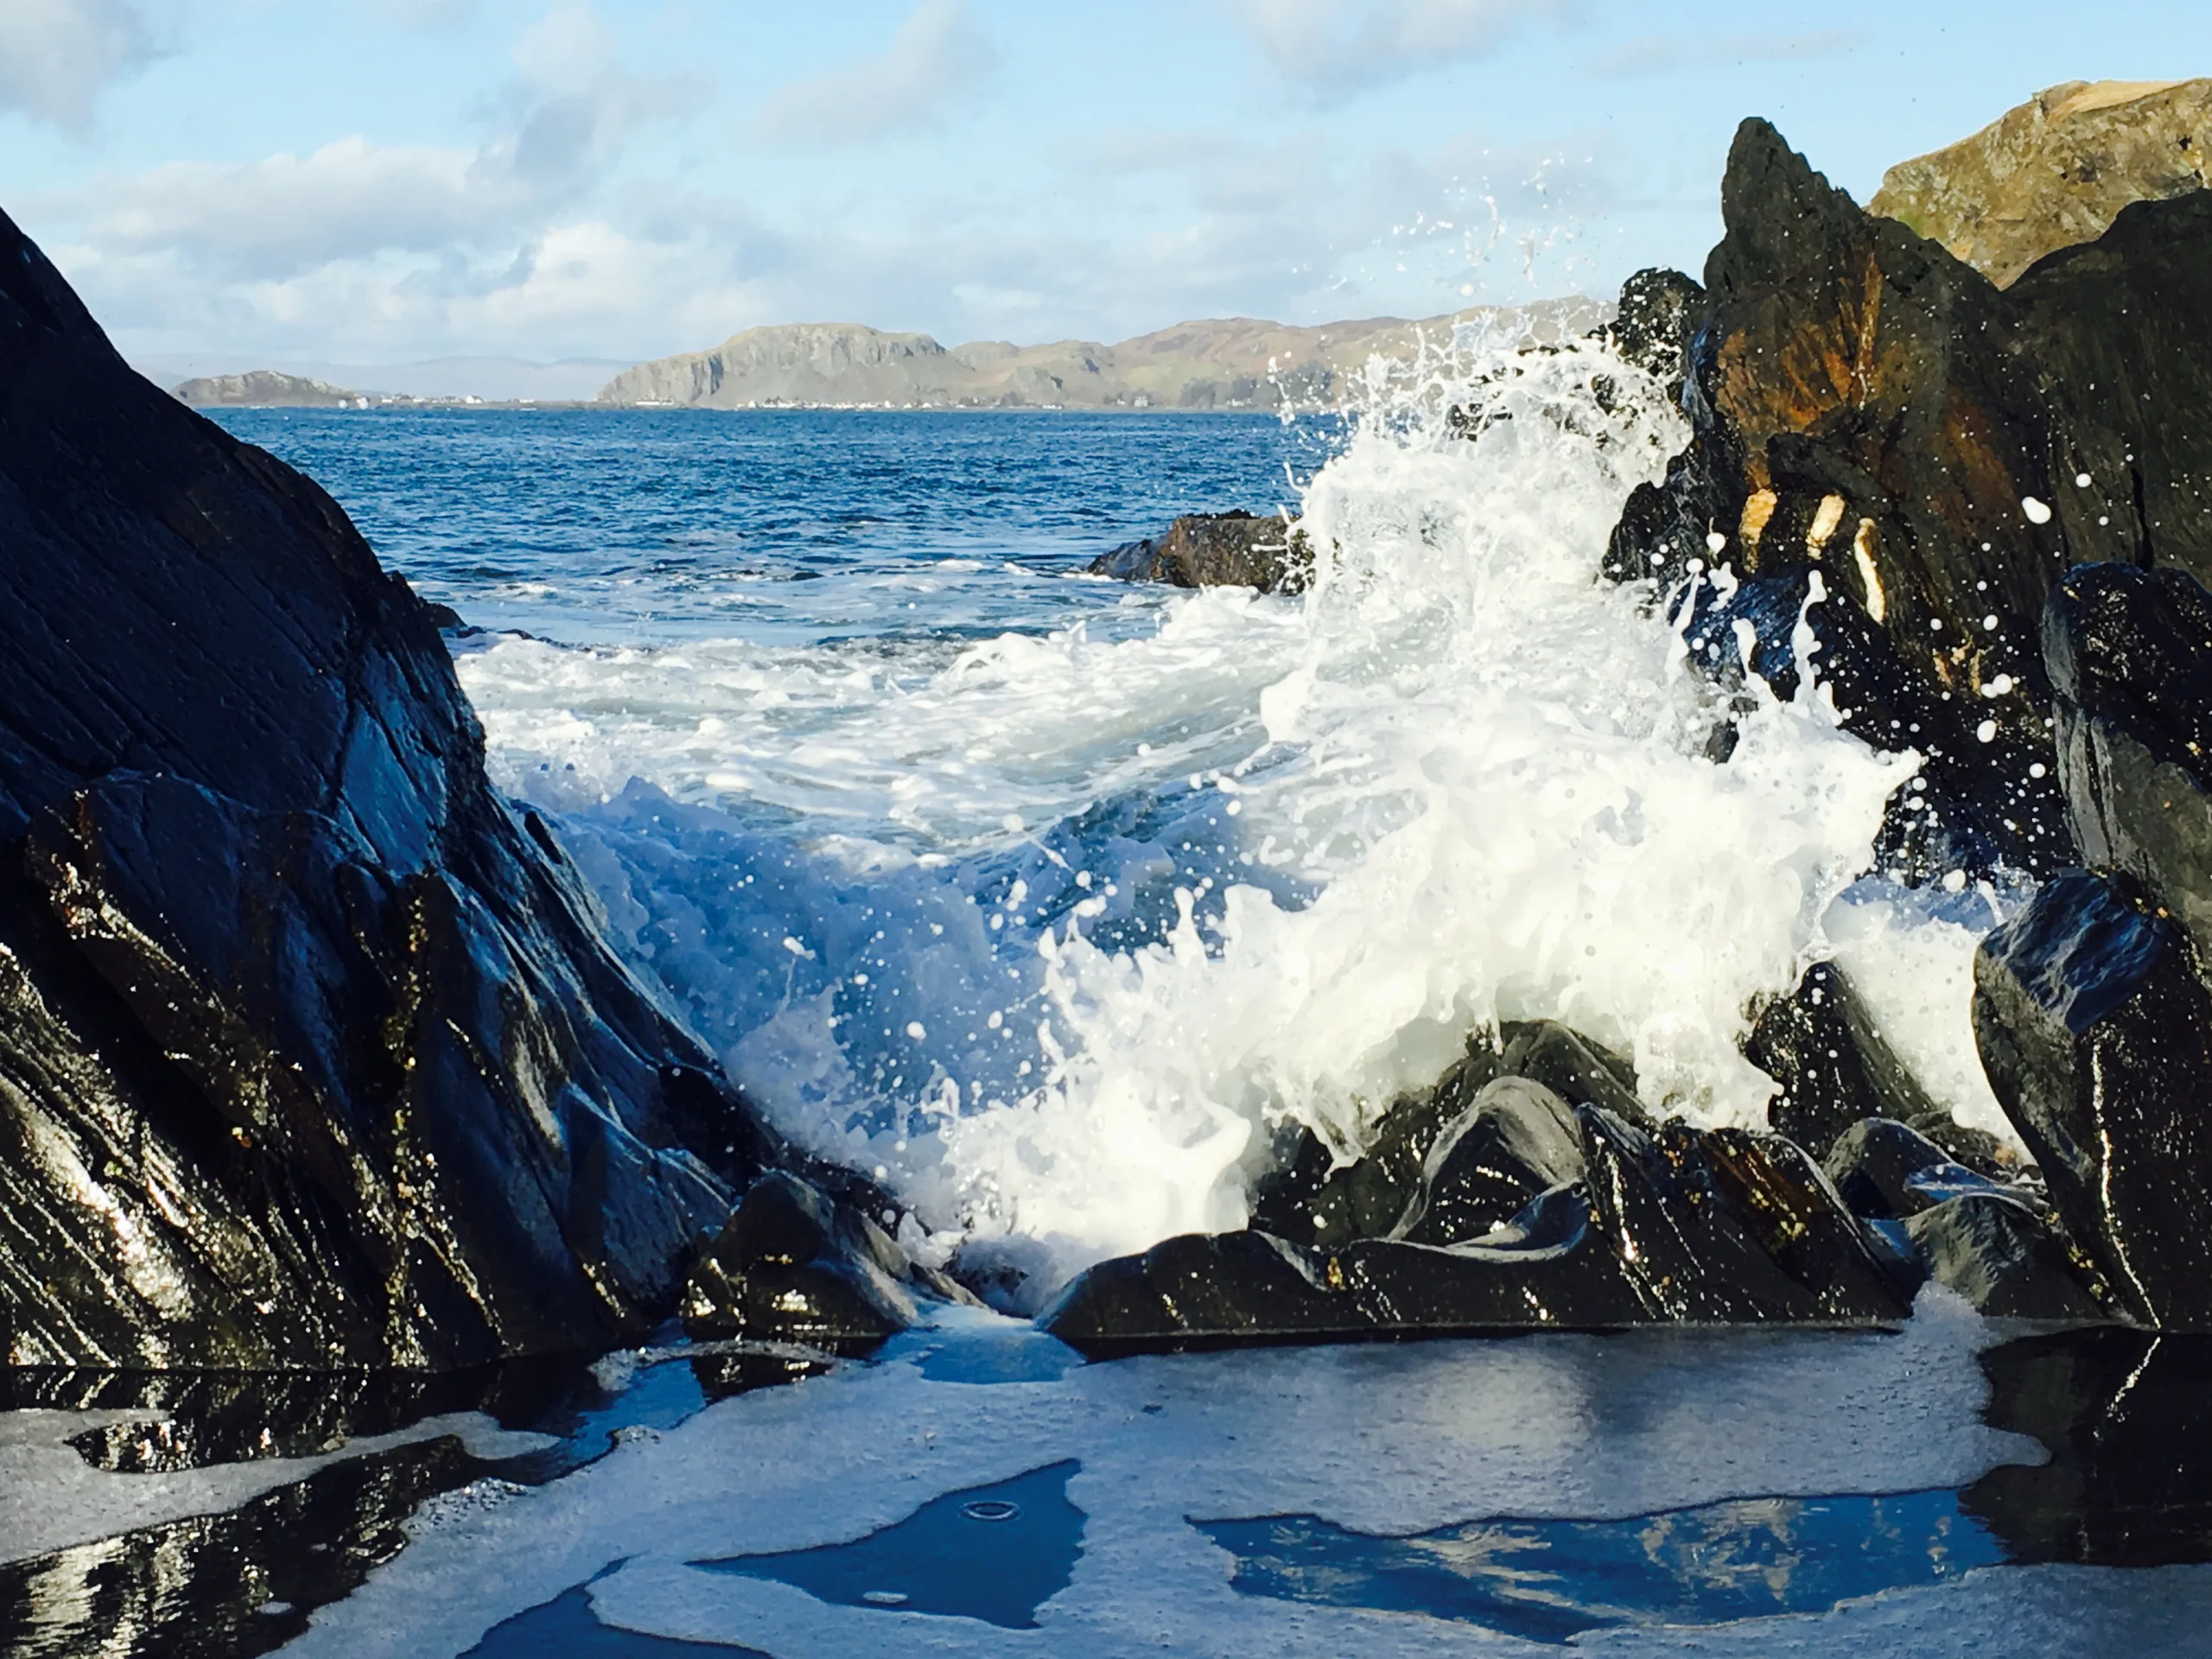 Waves crashing on the shore of Luing, one of Scotland's famous slate islands.